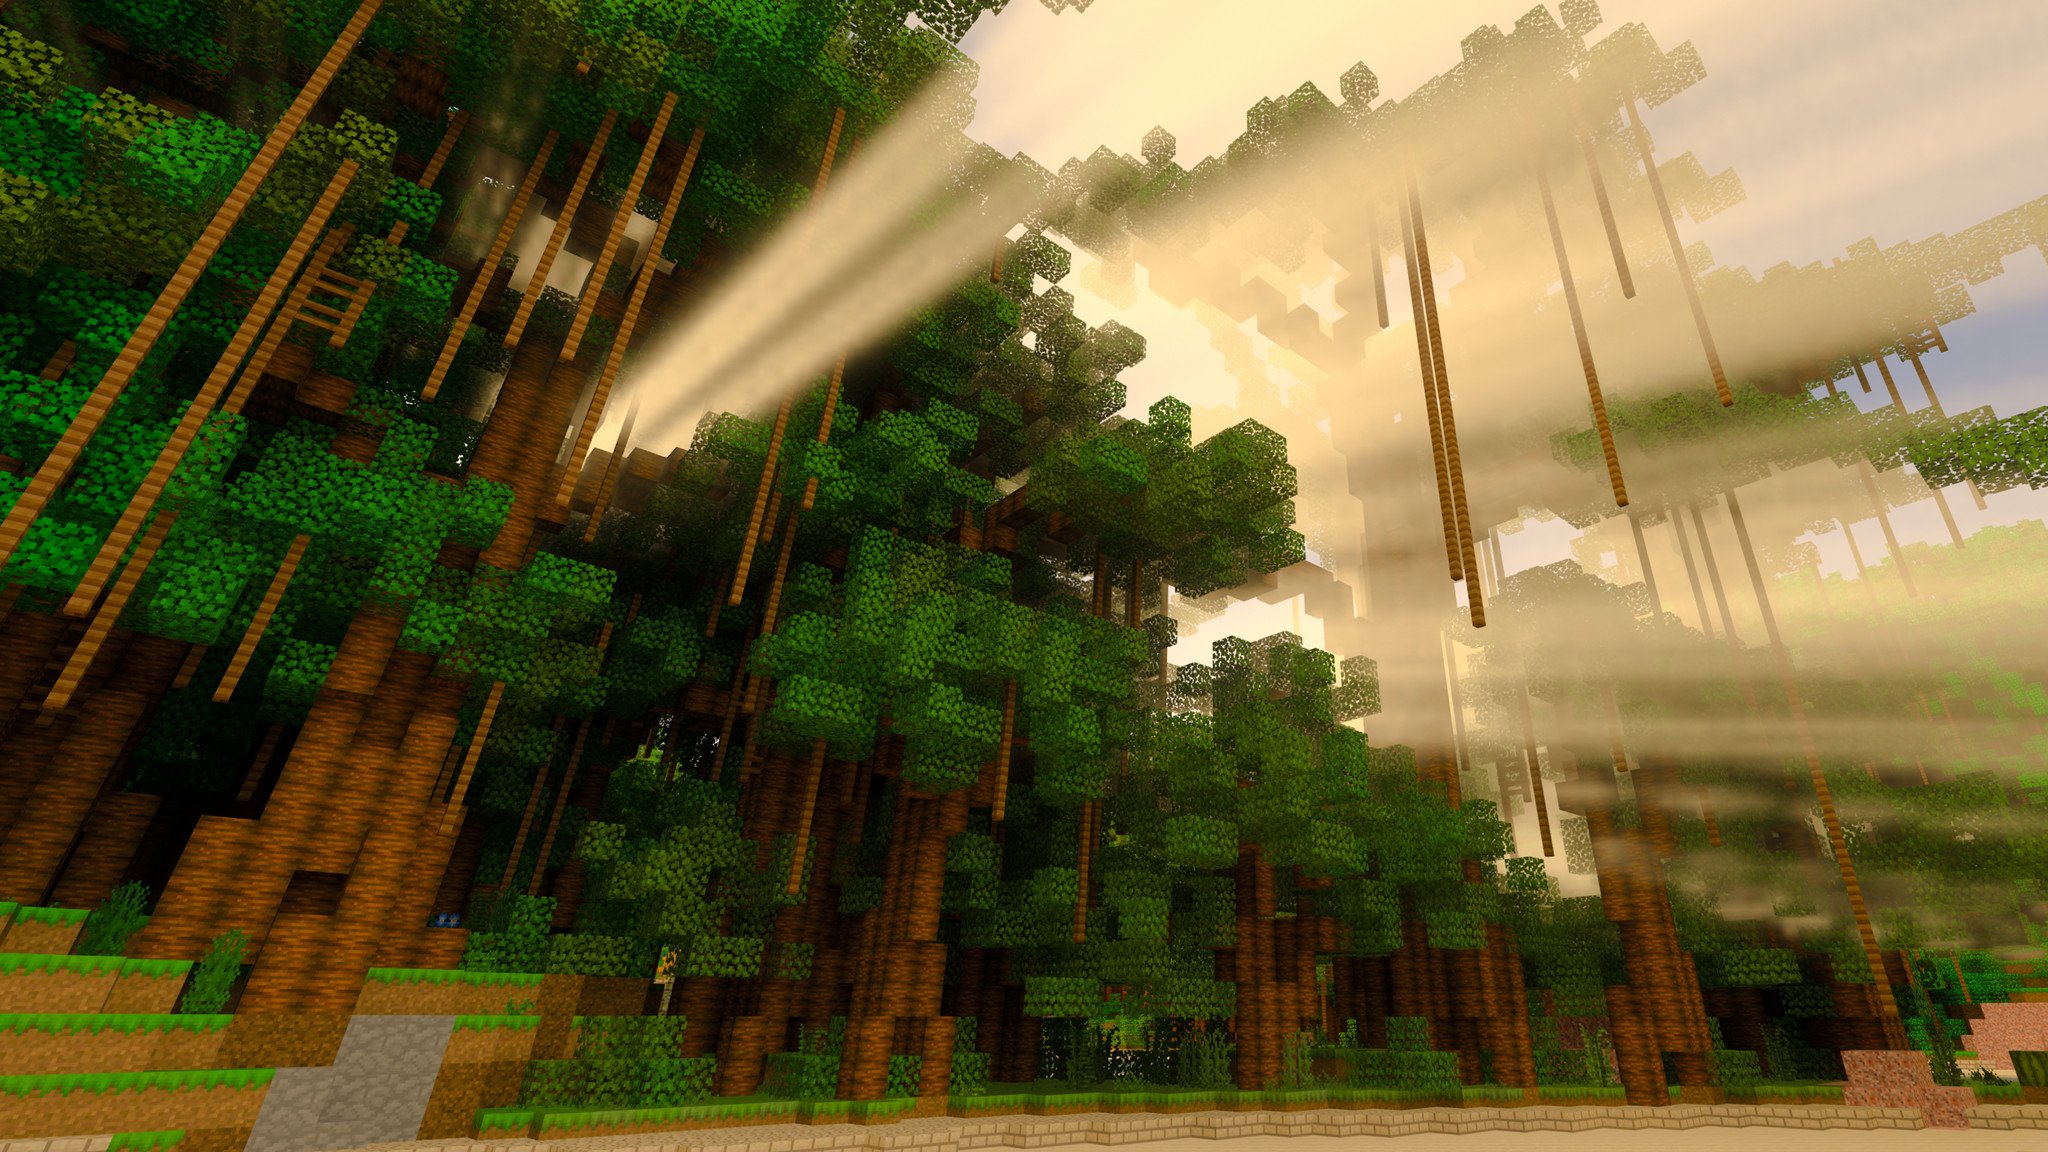 Minecraft ray tracing without RTX cards - Just shaders in Minecraft Java  Edition!  Your Minecraft can look like ray tracing without an RTX 2060+  graphics card! Join us on our MGN